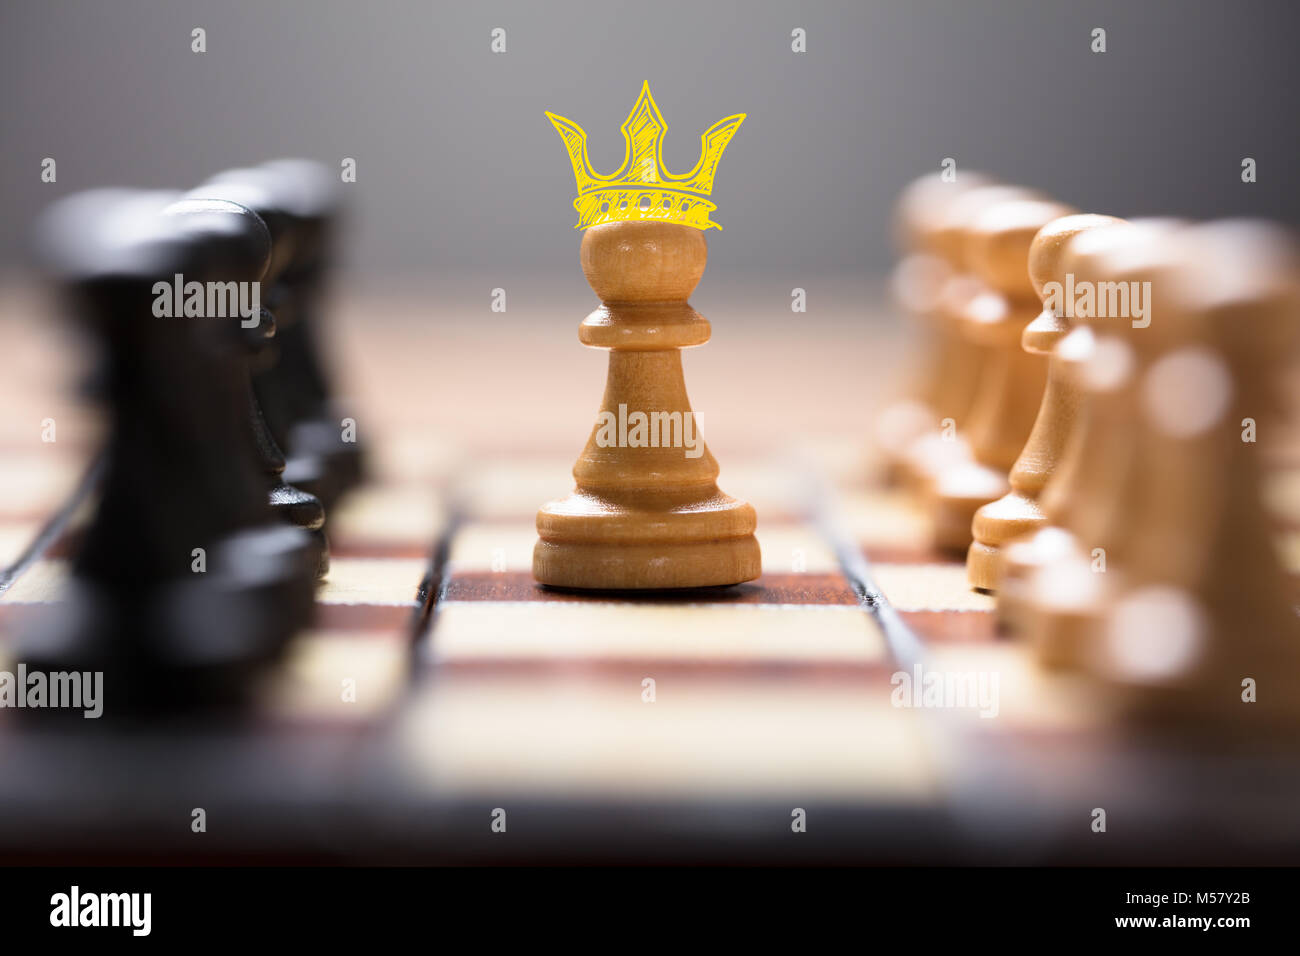 Closeup of pawn with king crown amidst chess pieces on board game representing leadership Stock Photo